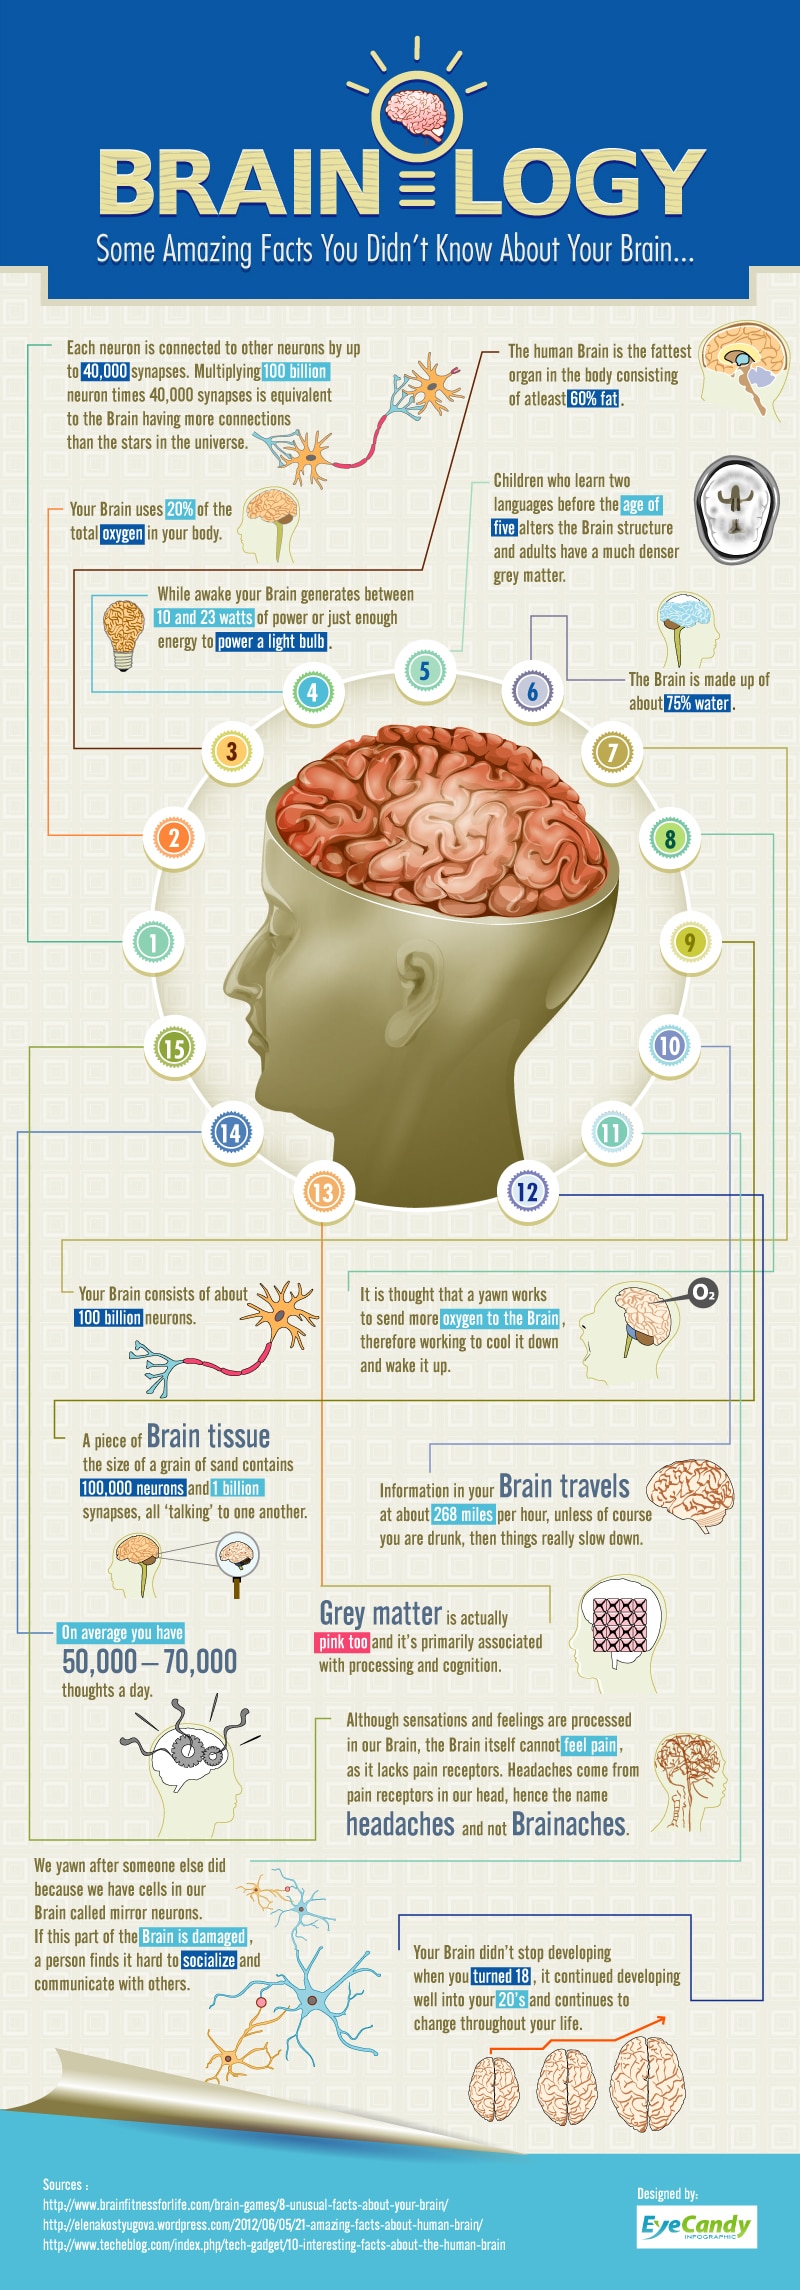 brainology-facts-about-brain-infographic